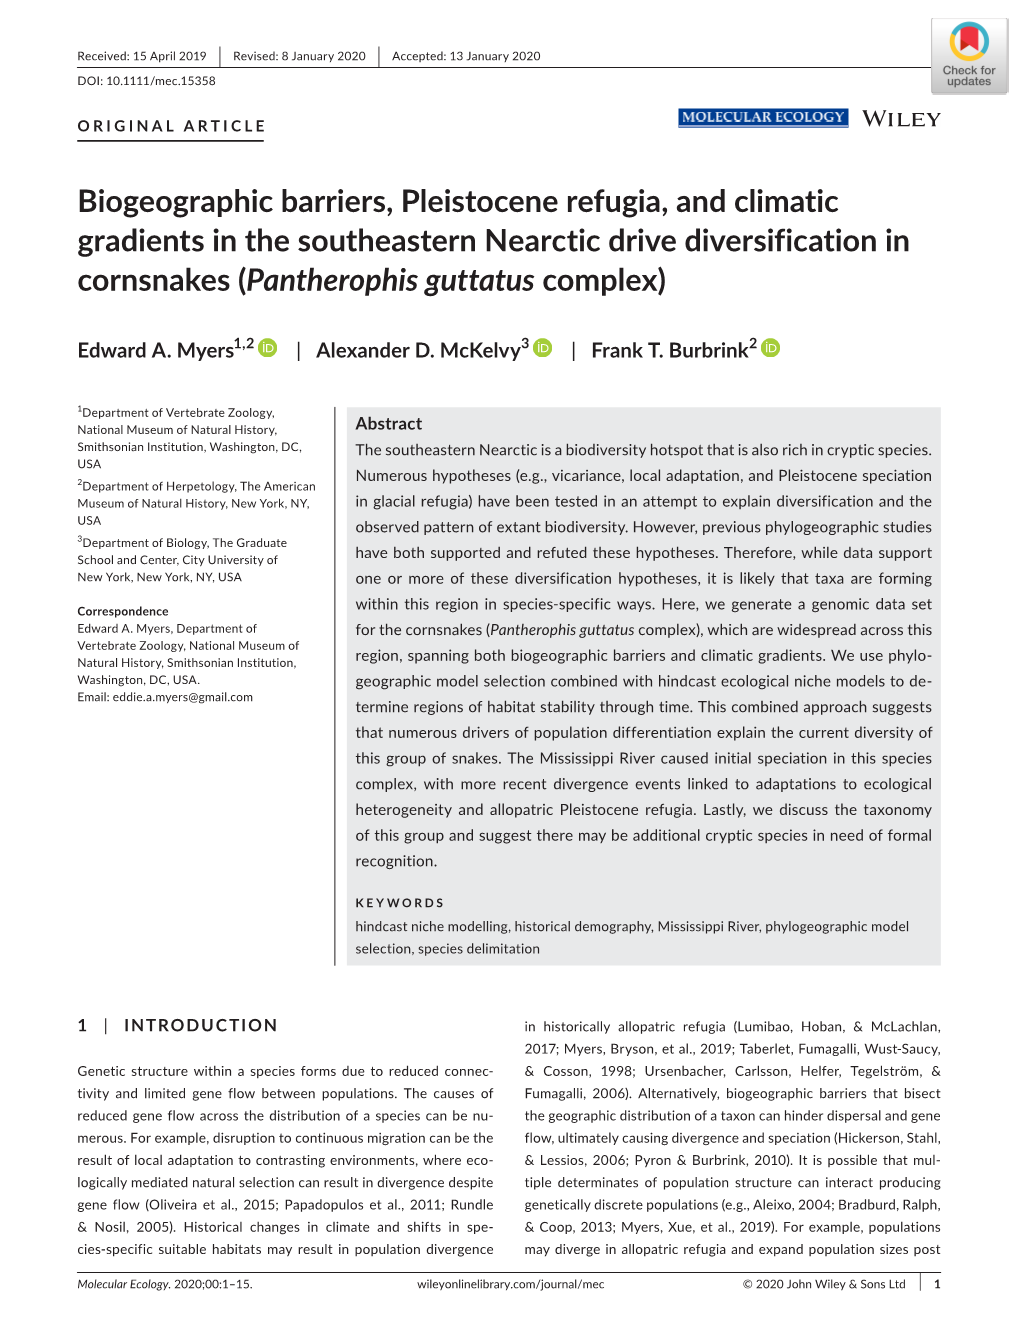 Biogeographic Barriers, Pleistocene Refugia, and Climatic Gradients in the Southeastern Nearctic Drive Diversification in Cornsnakes (Pantherophis Guttatus Complex)